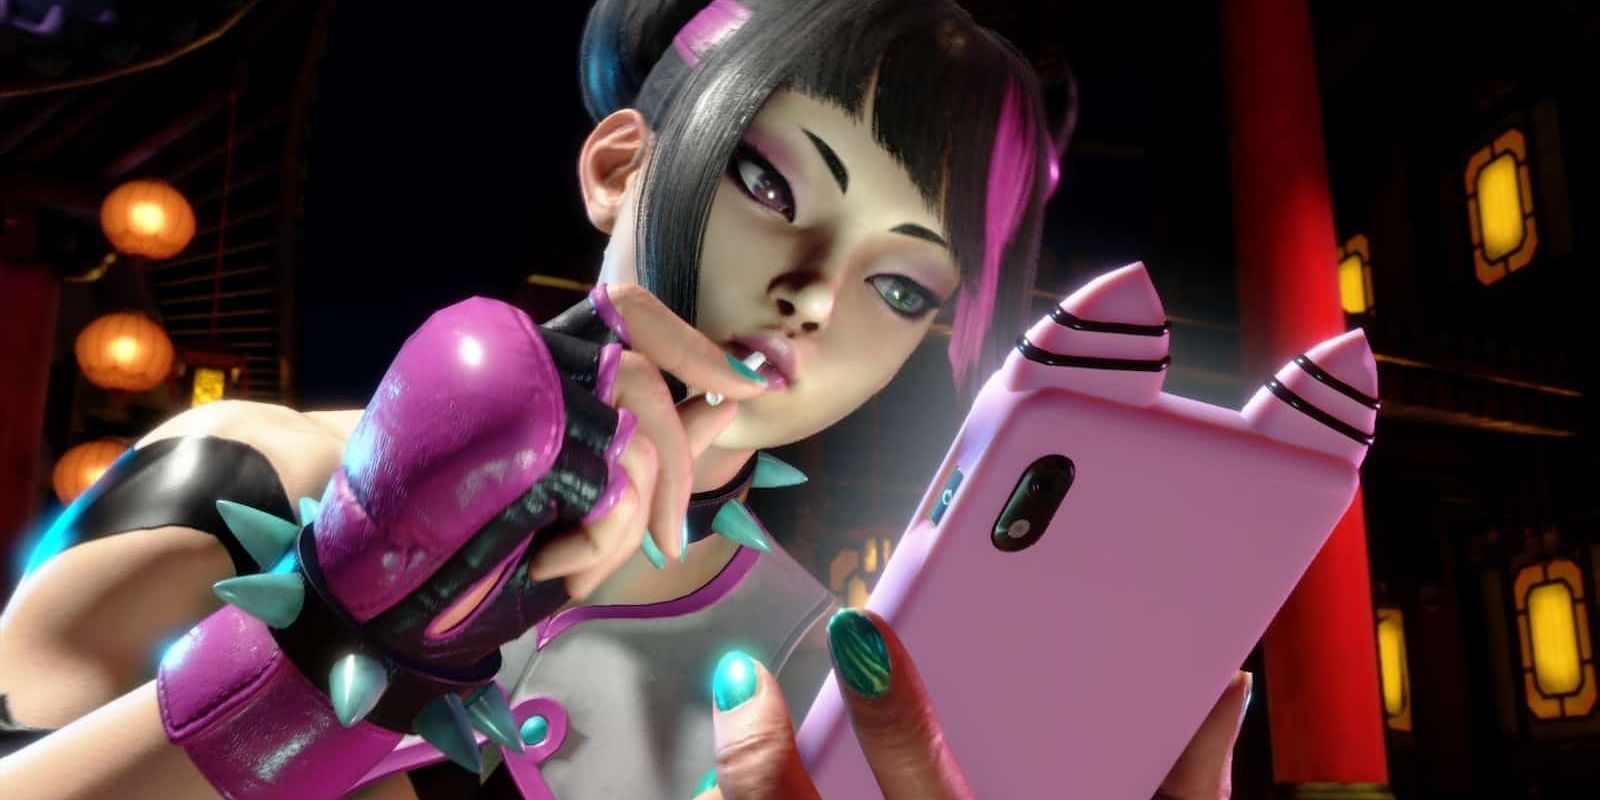 Juri looking at her phone with a lolipop in her mouth